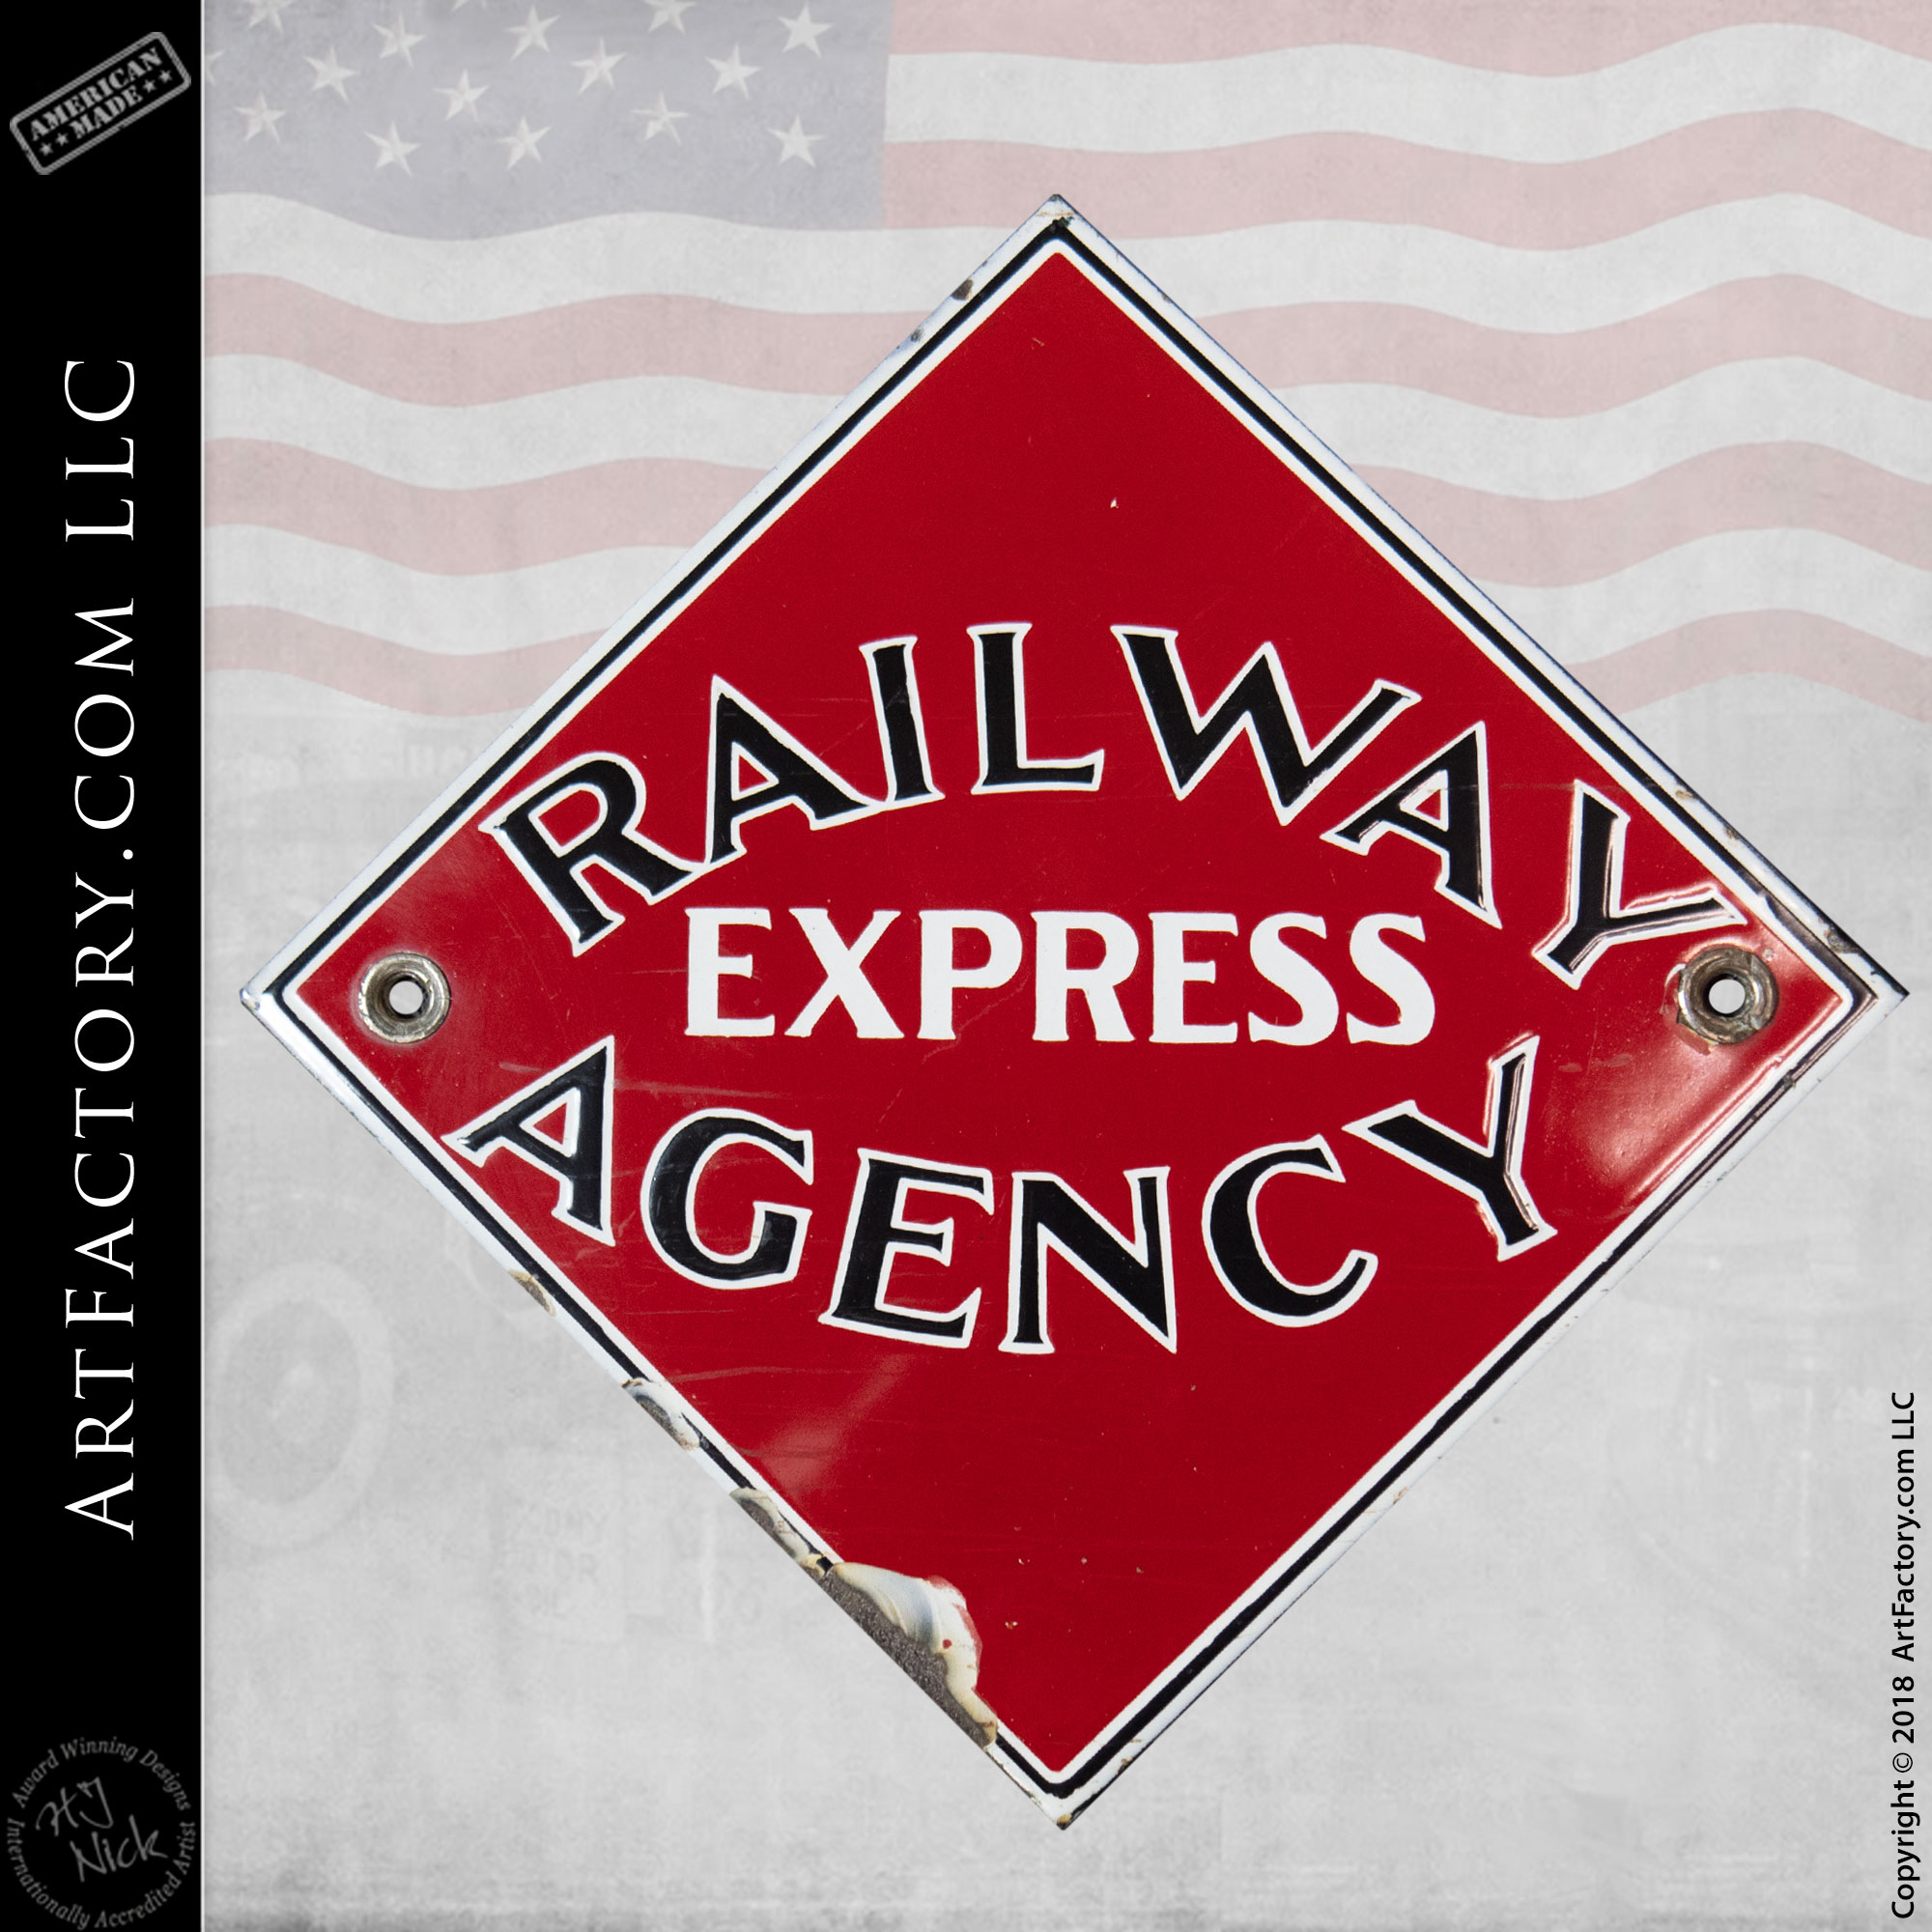 Vintage Railway Express Agency Sign